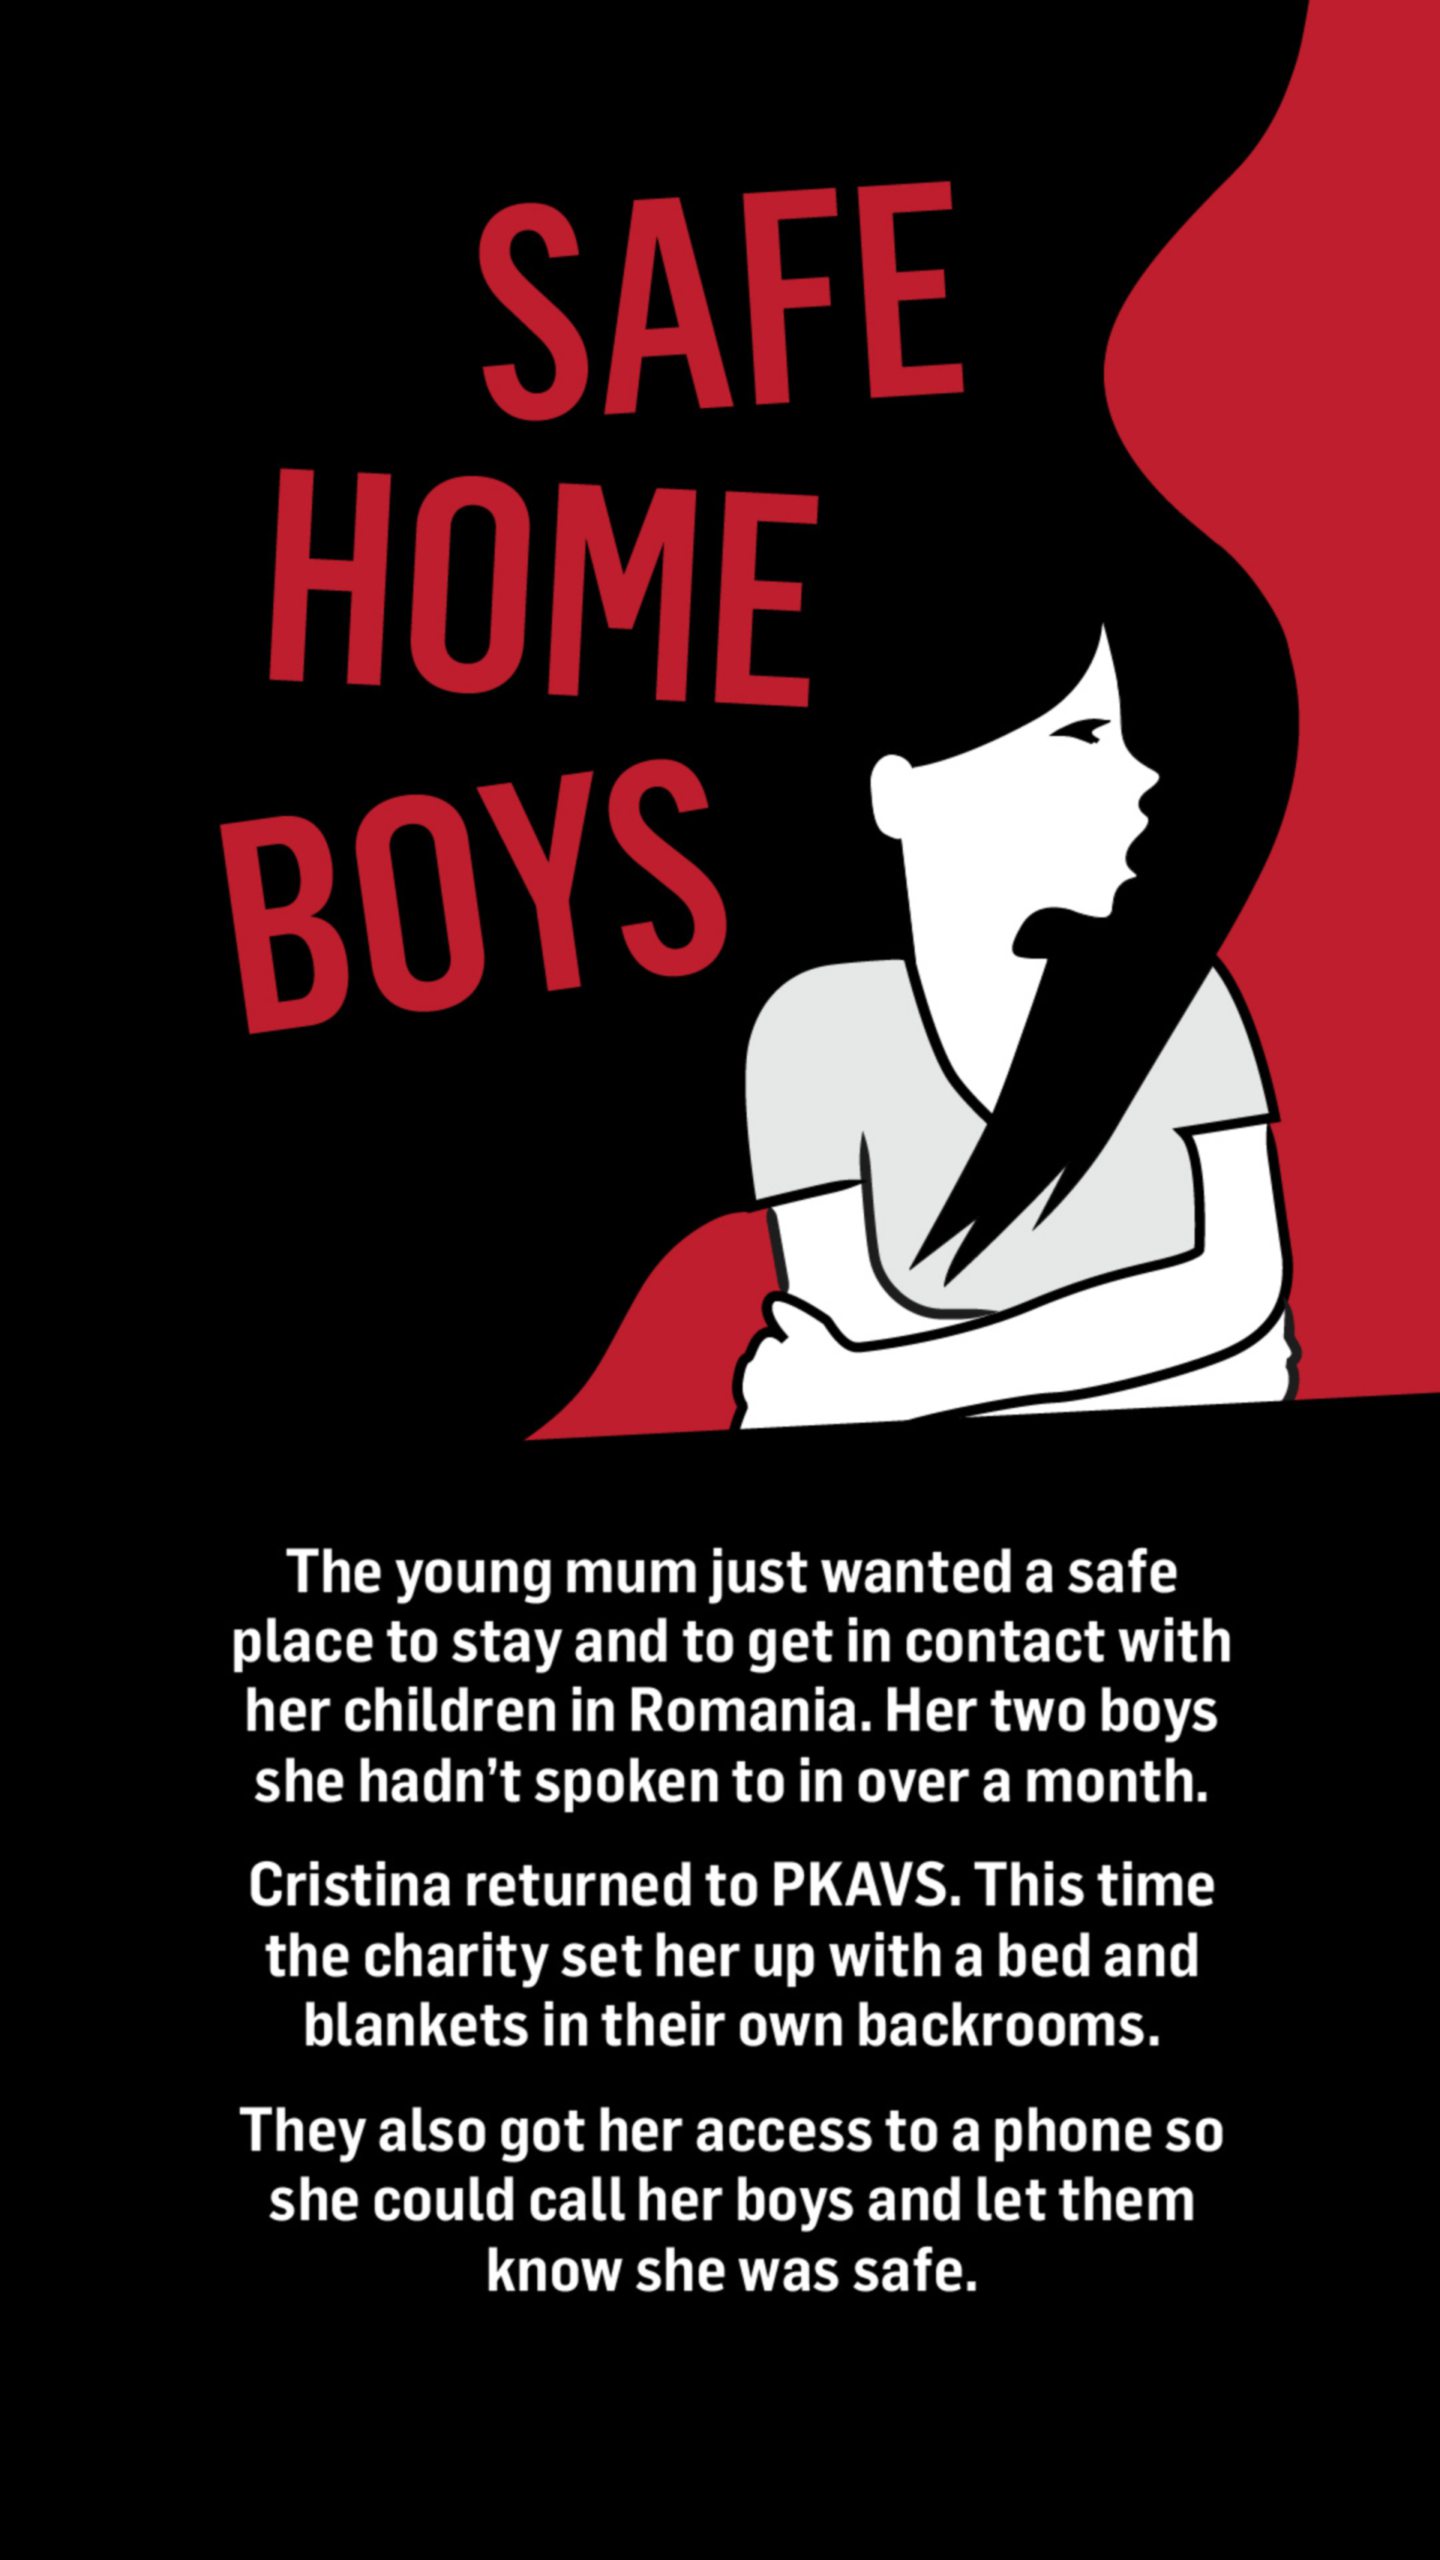 An illustration of a woman lying on her back with the words safe, home and boys floating around her head. Words below the image read: The young mum just wanted a safe place to stay and to get in contact with her children in Romania.

Her two boys she hadn't spoken to in over a month.

Cristina returned to PKAVS. This time the charity set her up with a bed and blankets in their own backrooms.

They also got her access to a phone so she could call her boys and let them know she was safe.